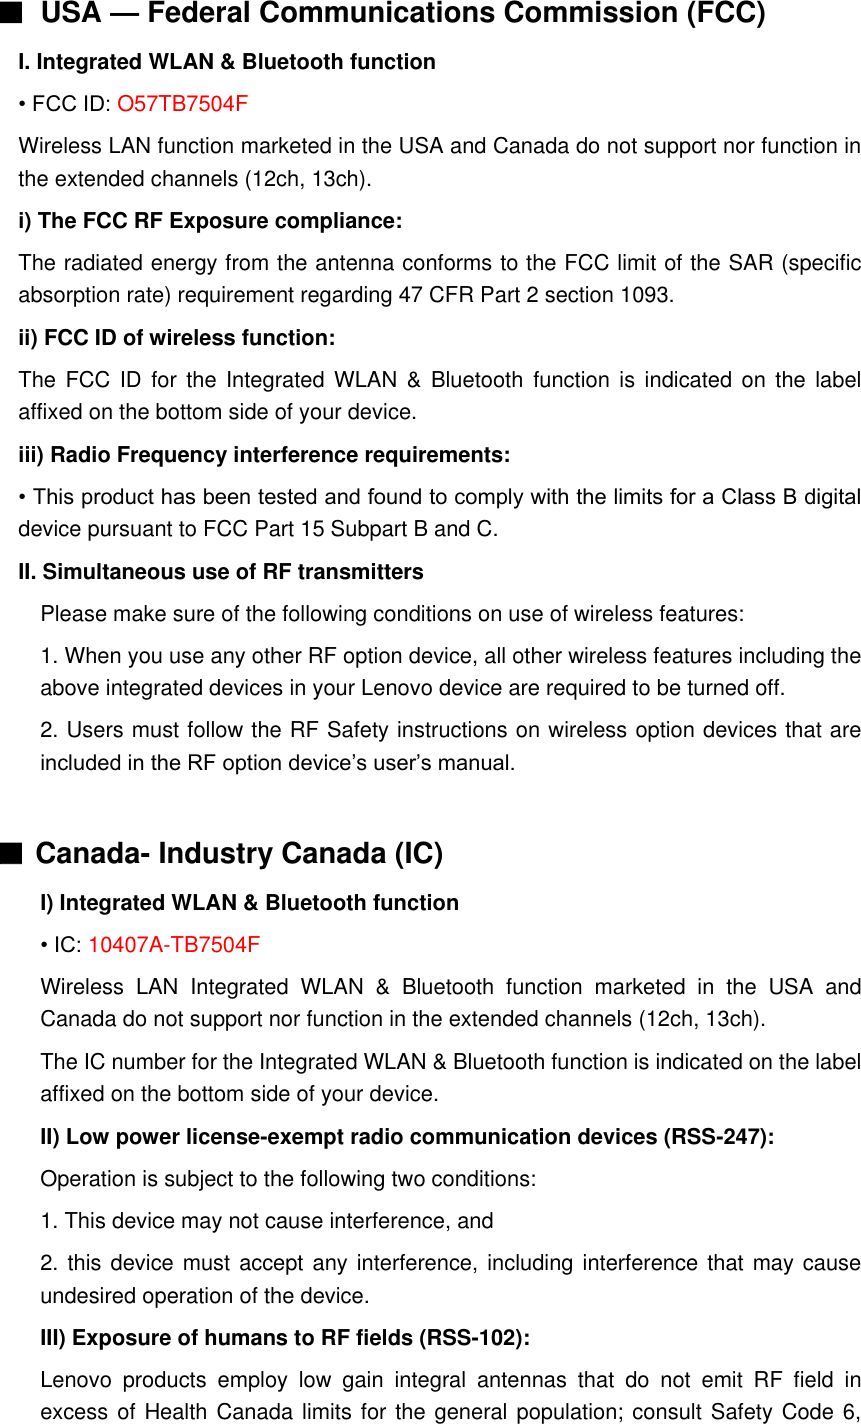 ■ USA — Federal Communications Commission (FCC)   I. Integrated WLAN &amp; Bluetooth function • FCC ID: O57TB7504F Wireless LAN function marketed in the USA and Canada do not support nor function in the extended channels (12ch, 13ch). i) The FCC RF Exposure compliance: The radiated energy from the antenna conforms to the FCC limit of the SAR (specific absorption rate) requirement regarding 47 CFR Part 2 section 1093. ii) FCC ID of wireless function: The FCC ID  for  the  Integrated  WLAN  &amp;  Bluetooth function  is  indicated on the label affixed on the bottom side of your device. iii) Radio Frequency interference requirements: • This product has been tested and found to comply with the limits for a Class B digital device pursuant to FCC Part 15 Subpart B and C. II. Simultaneous use of RF transmitters Please make sure of the following conditions on use of wireless features: 1. When you use any other RF option device, all other wireless features including the above integrated devices in your Lenovo device are required to be turned off. 2. Users must follow the RF Safety instructions on wireless option devices that are included in the RF option device’s user’s manual.  ■ Canada- Industry Canada (IC) I) Integrated WLAN &amp; Bluetooth function • IC: 10407A-TB7504F Wireless  LAN  Integrated  WLAN  &amp;  Bluetooth  function  marketed  in  the  USA  and Canada do not support nor function in the extended channels (12ch, 13ch). The IC number for the Integrated WLAN &amp; Bluetooth function is indicated on the label affixed on the bottom side of your device. II) Low power license-exempt radio communication devices (RSS-247): Operation is subject to the following two conditions: 1. This device may not cause interference, and 2. this device must accept any interference, including interference  that may cause undesired operation of the device. III) Exposure of humans to RF fields (RSS-102): Lenovo  products  employ  low  gain  integral  antennas  that  do  not  emit  RF  field  in excess of Health Canada limits for the general population; consult Safety Code 6, 